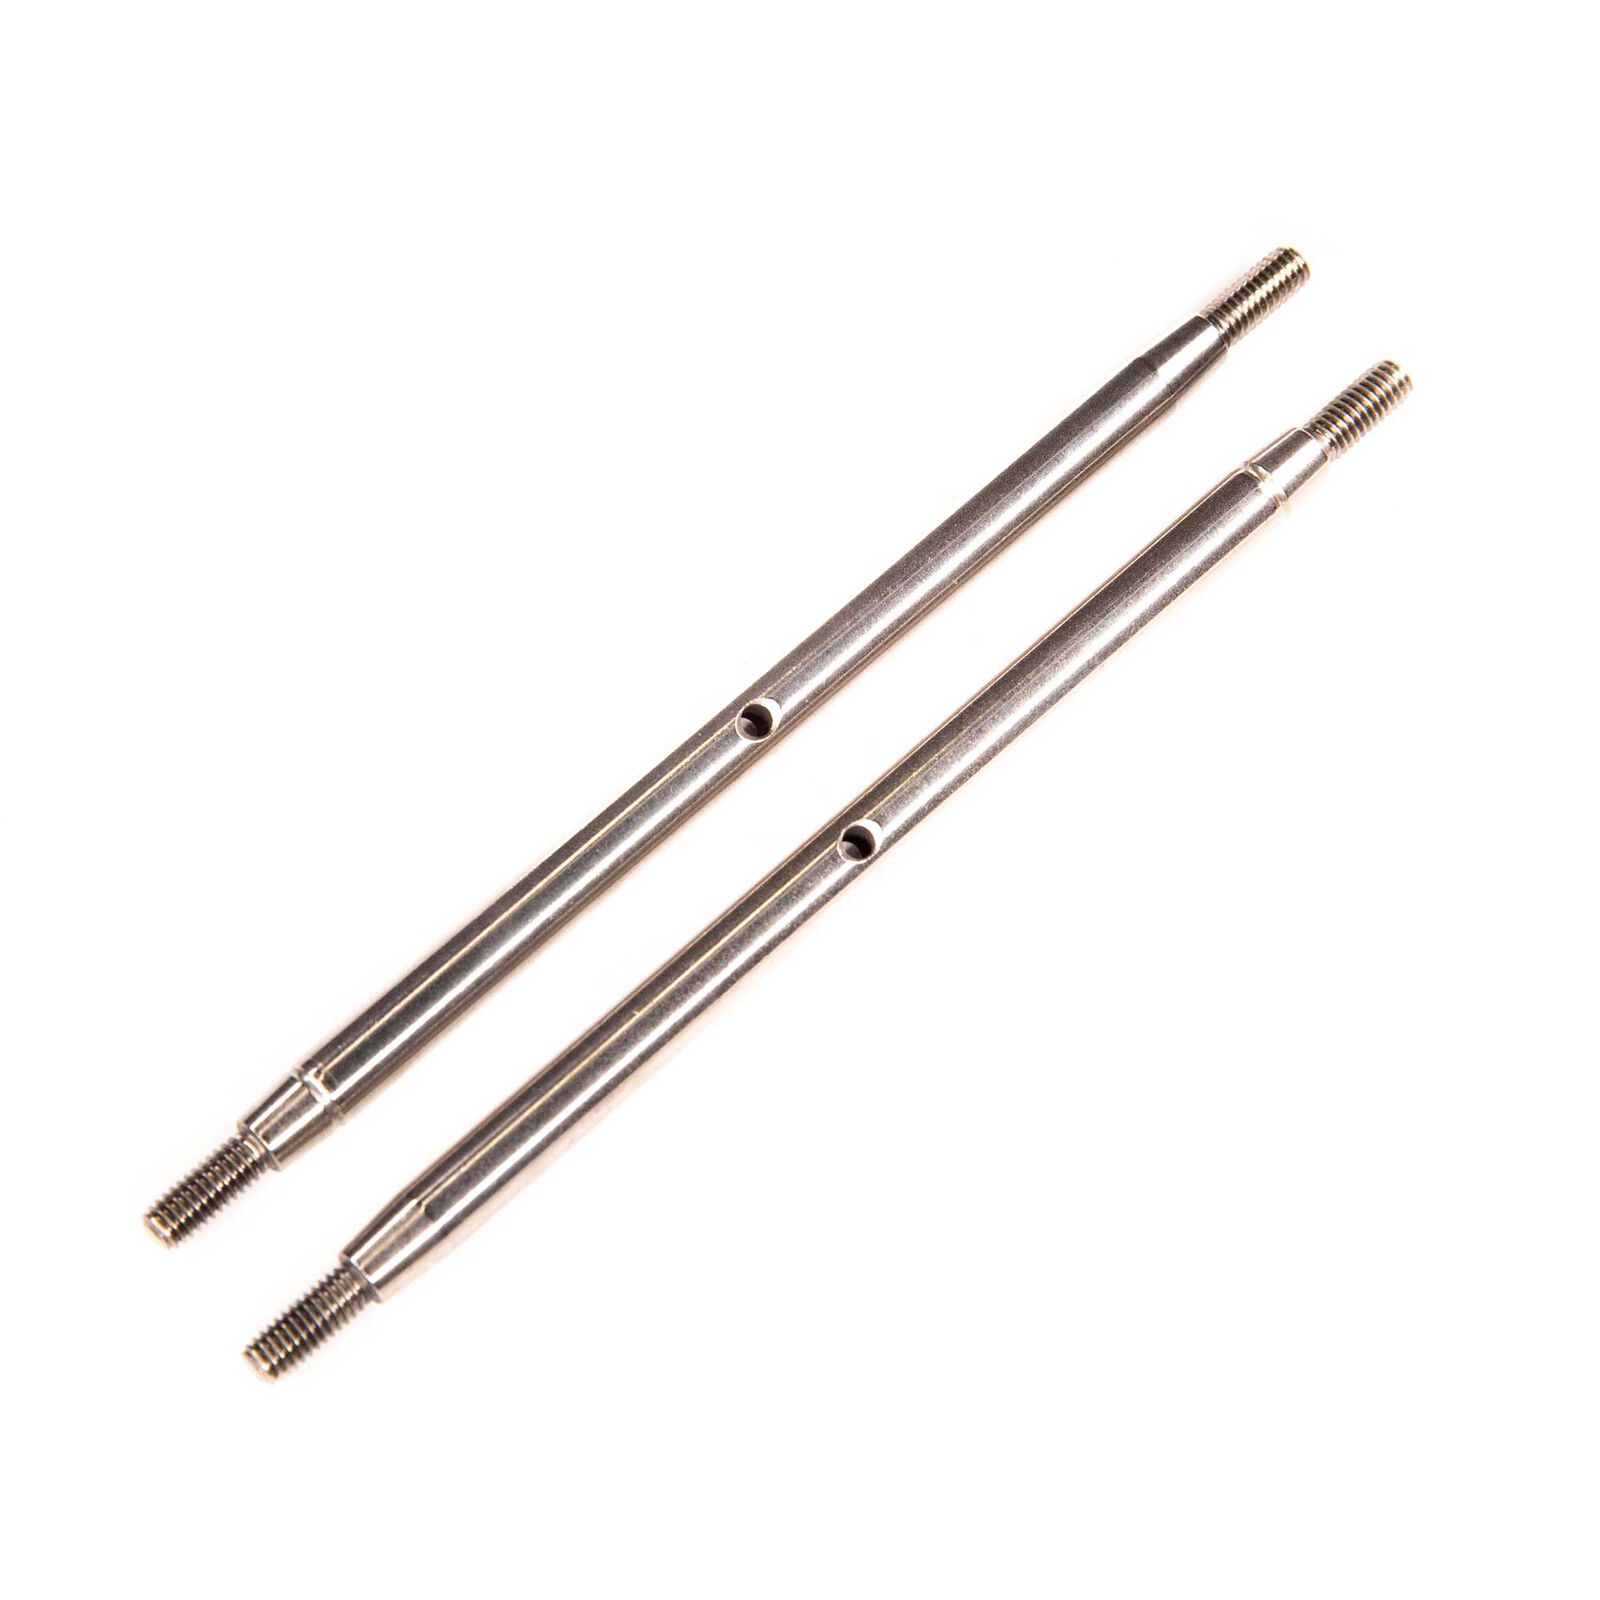 AXIAL Stainless Steel M6x 117mm Link (2pcs): SCX10III